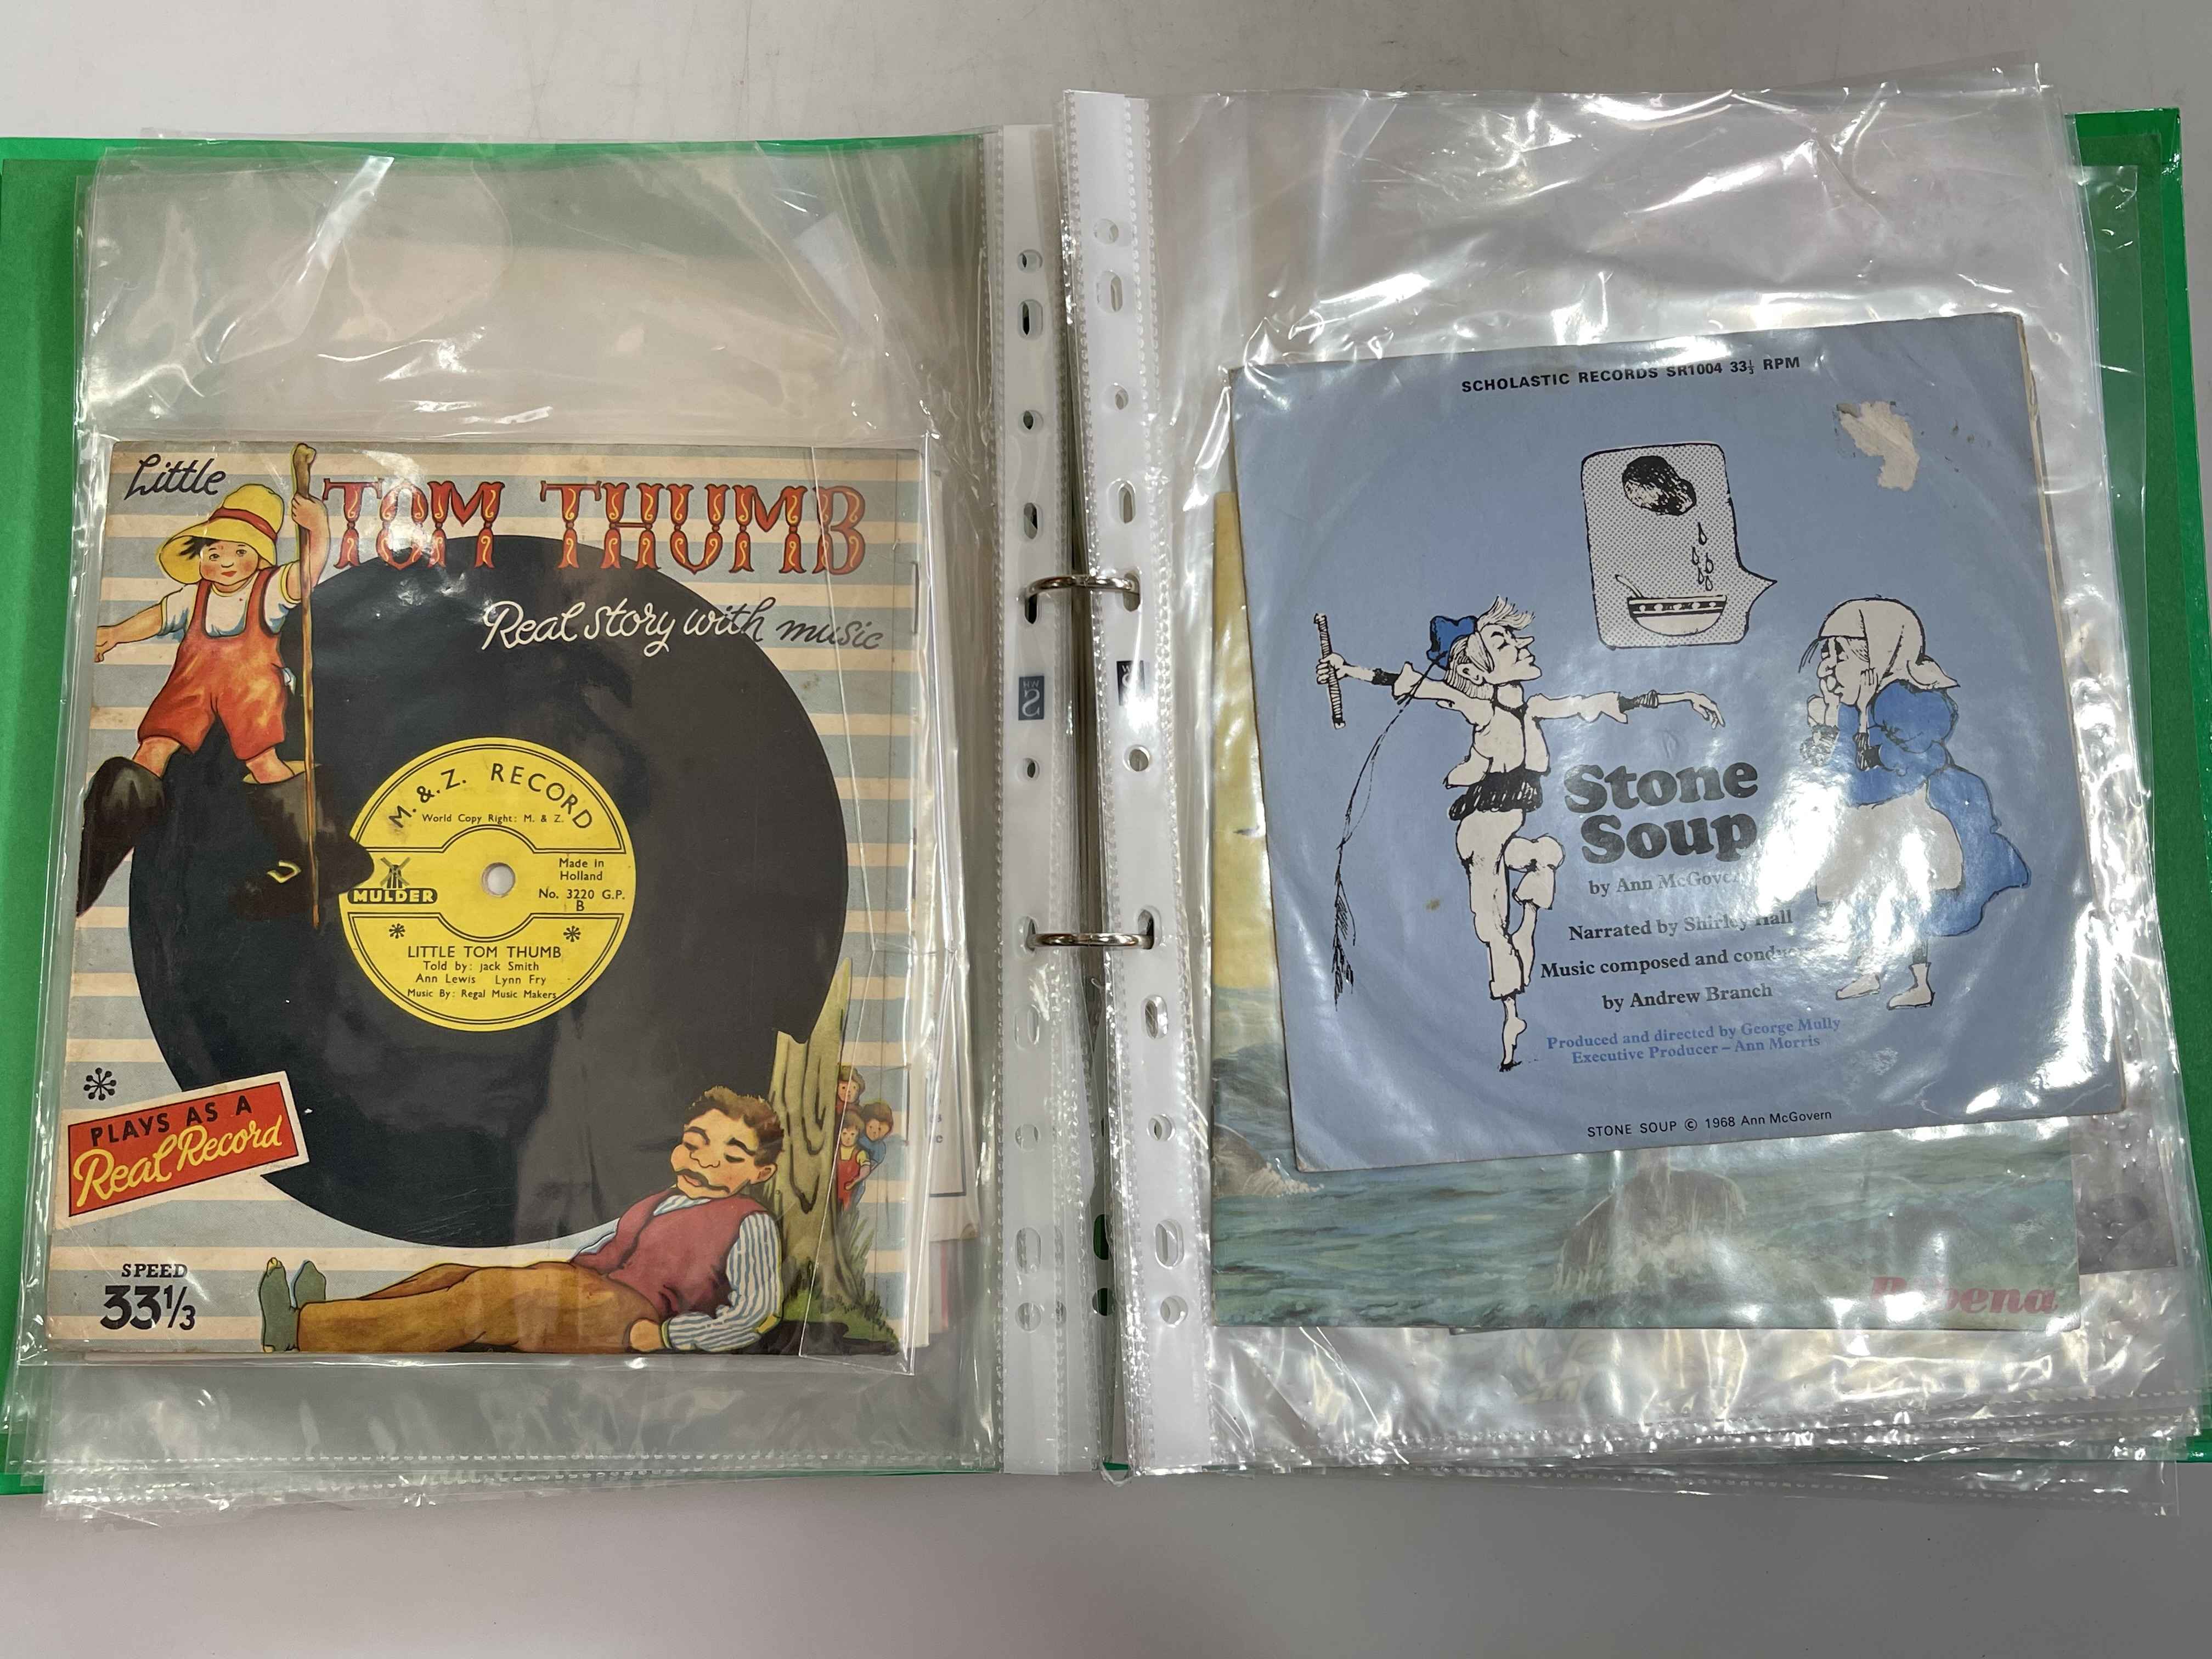 Folder of 1950's/60's musical greetings and postcards to be played on record player.